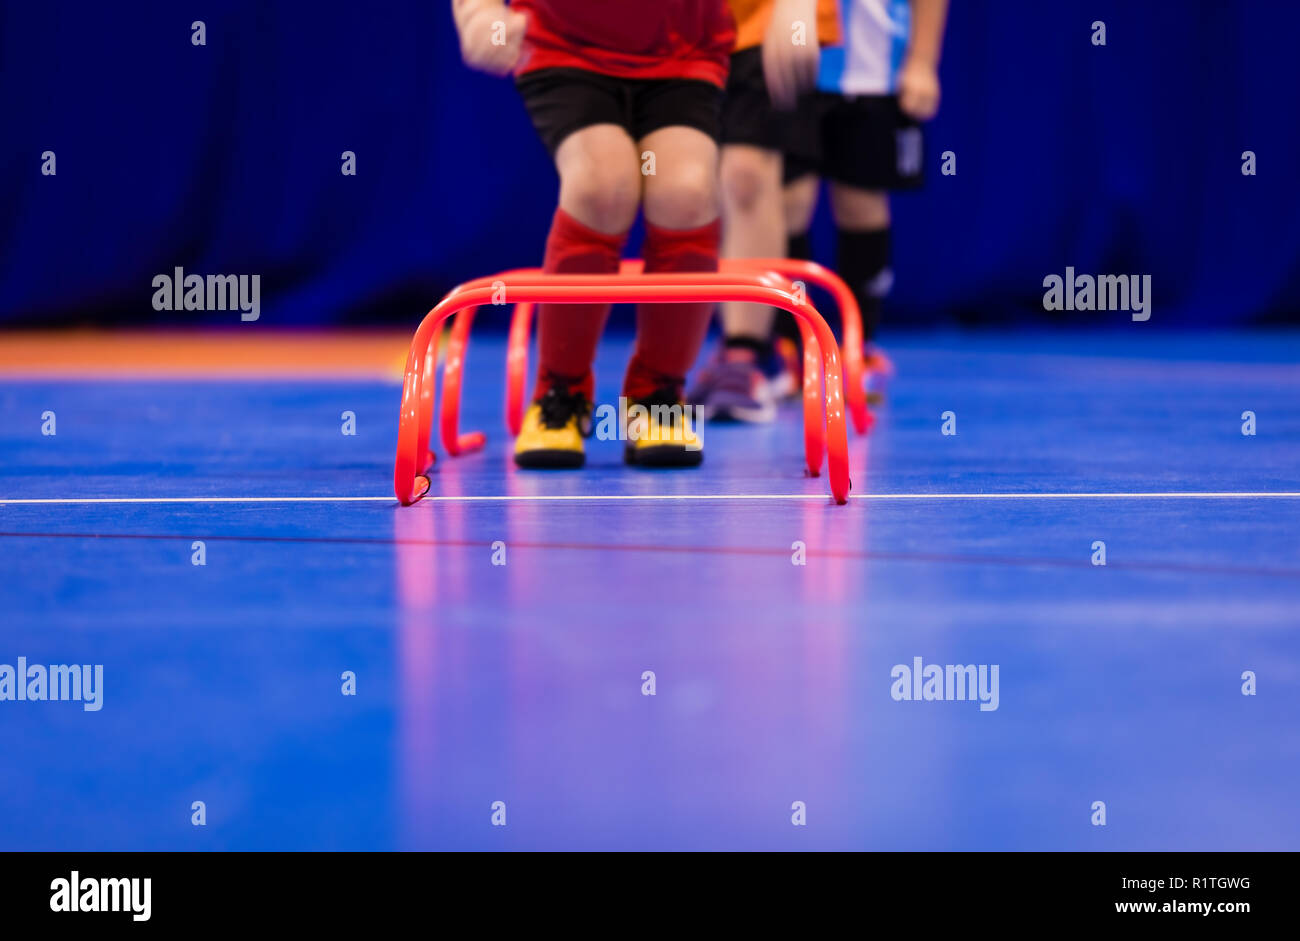 Futsal jumping drills. Futsal indoor soccer training session. Young futsal players exercising for agility and coordination Stock Photo